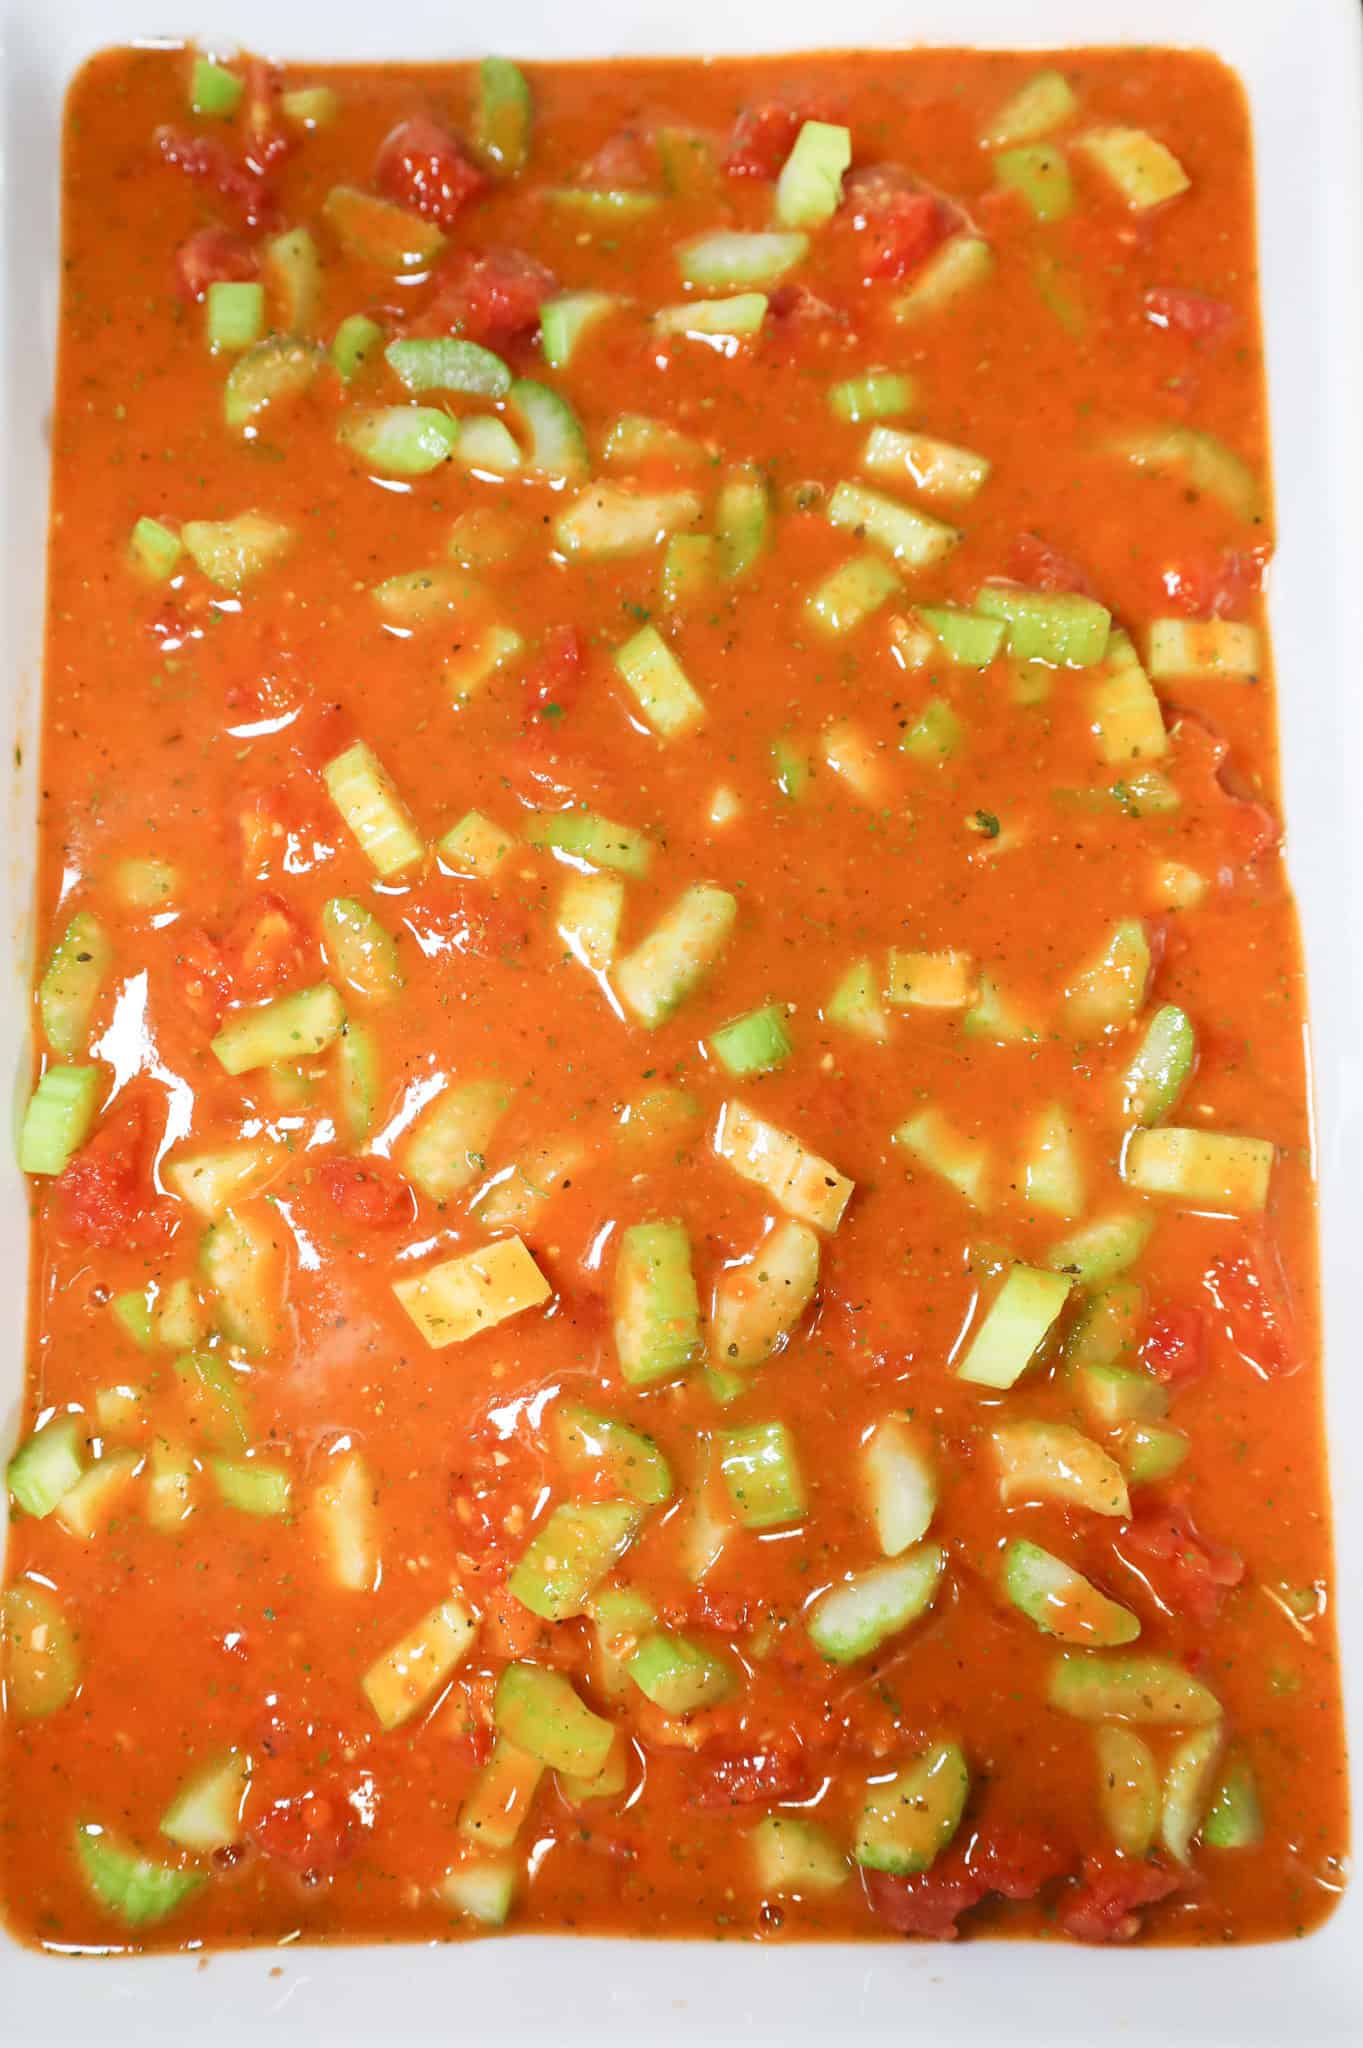 tomato soup mixture poured over ingredients in a casserole dish